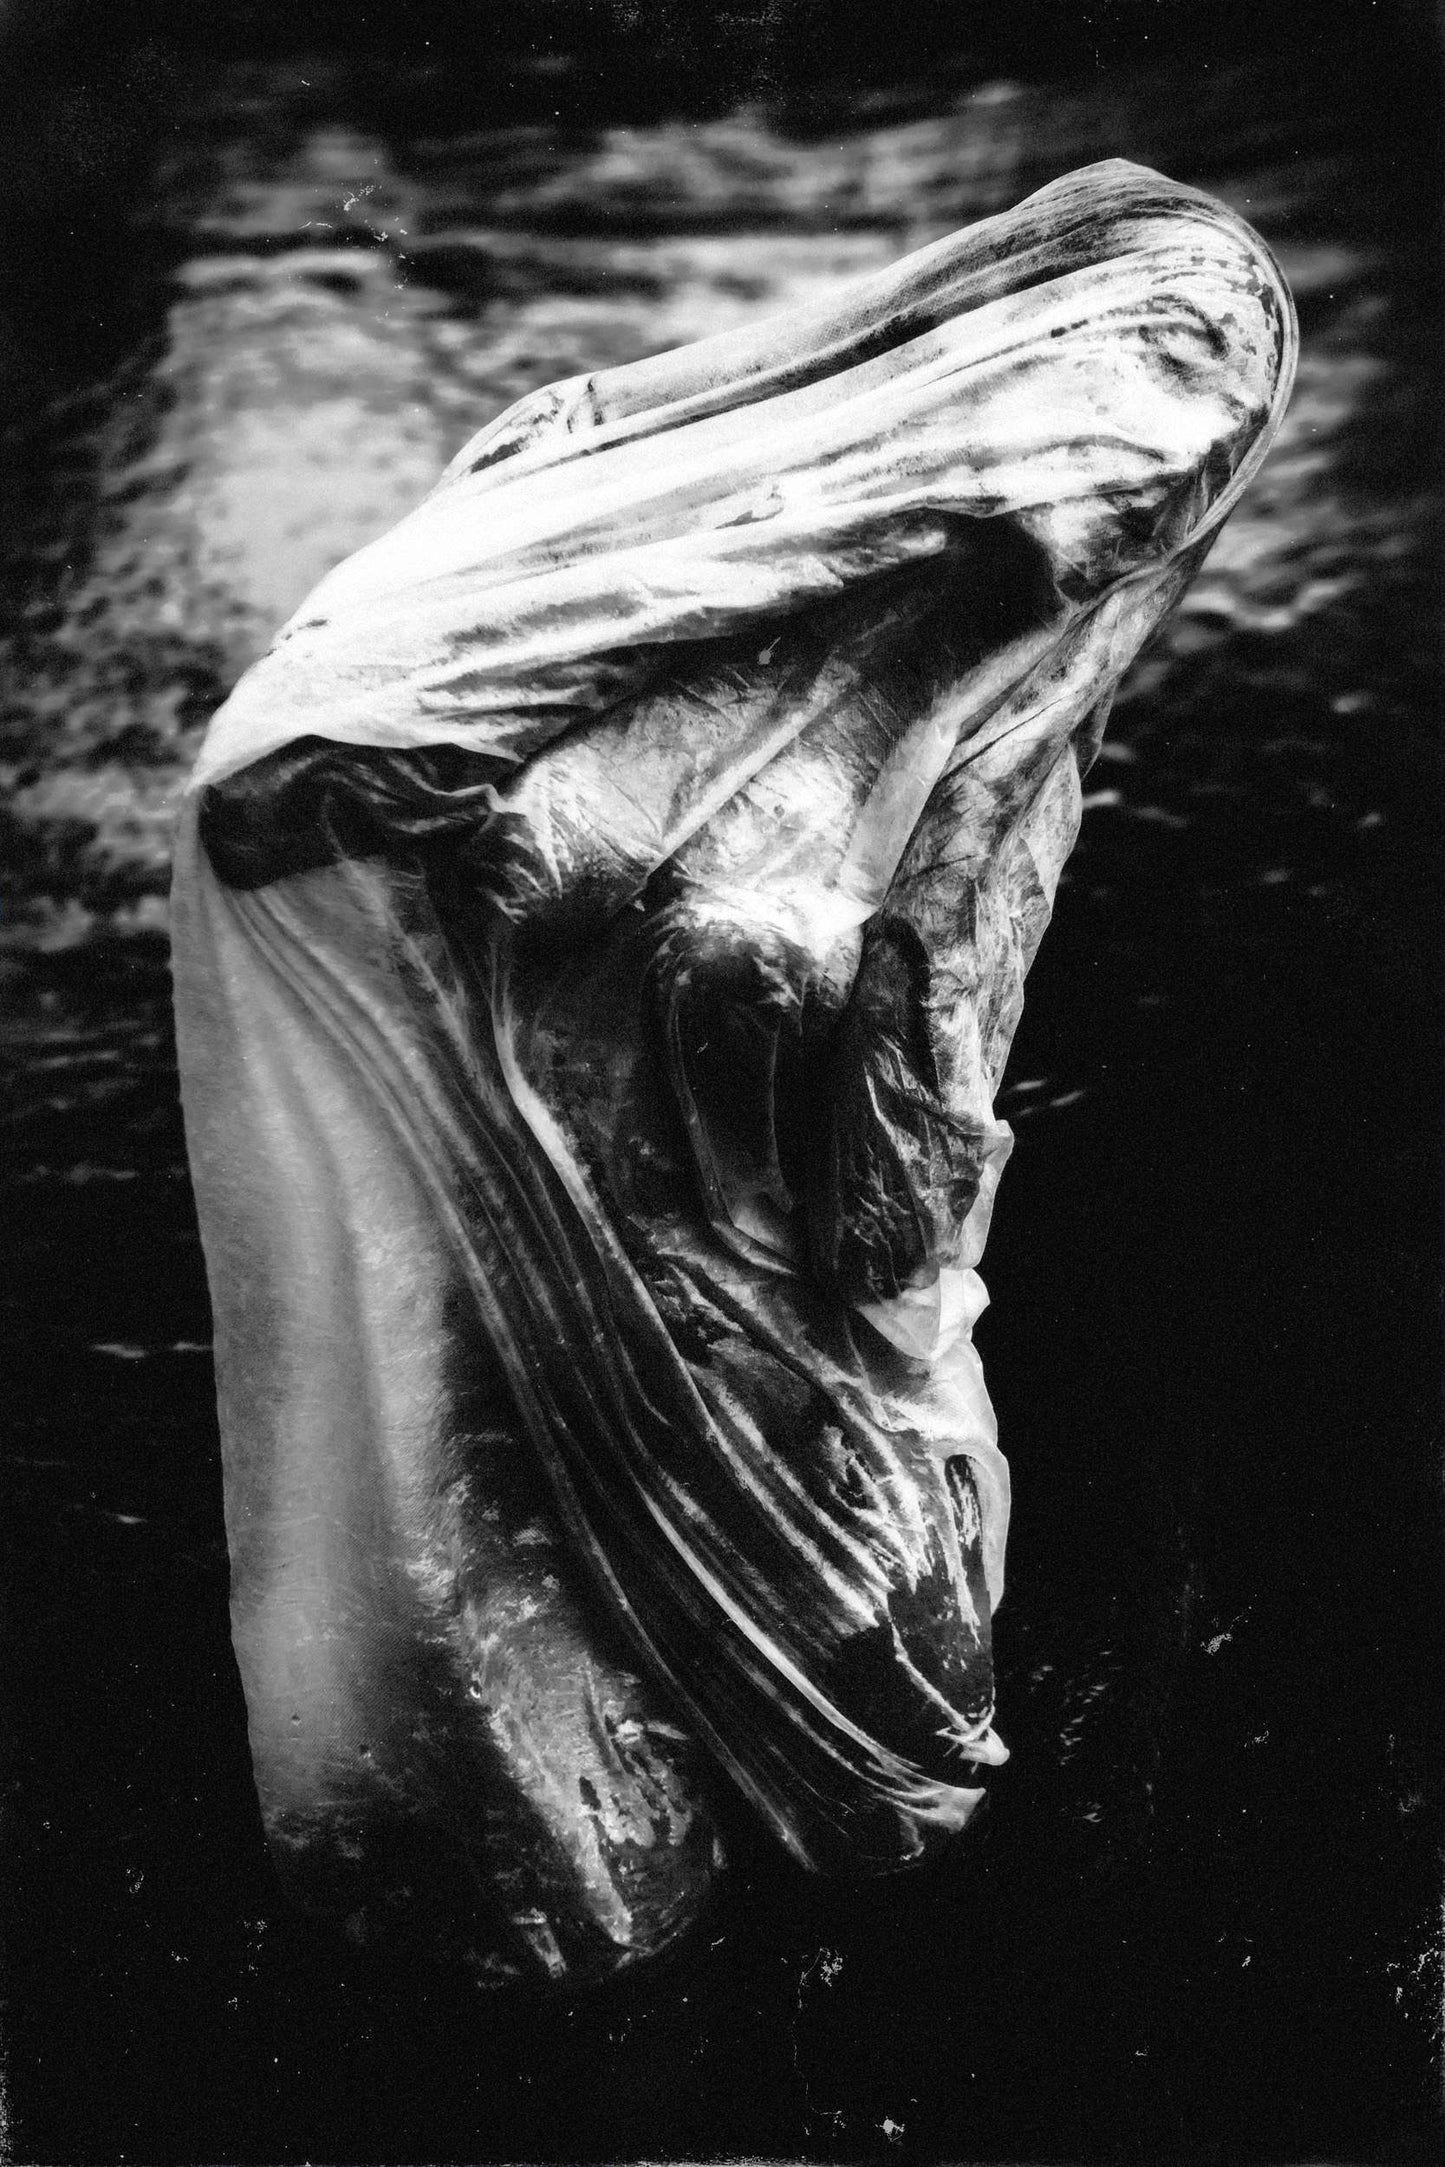 Fine artwork of an Eerie image of a woman standing in shallow water, draped in semi-transparent fabric, with facial features barely visible, captured by Ruslan Bolgov.